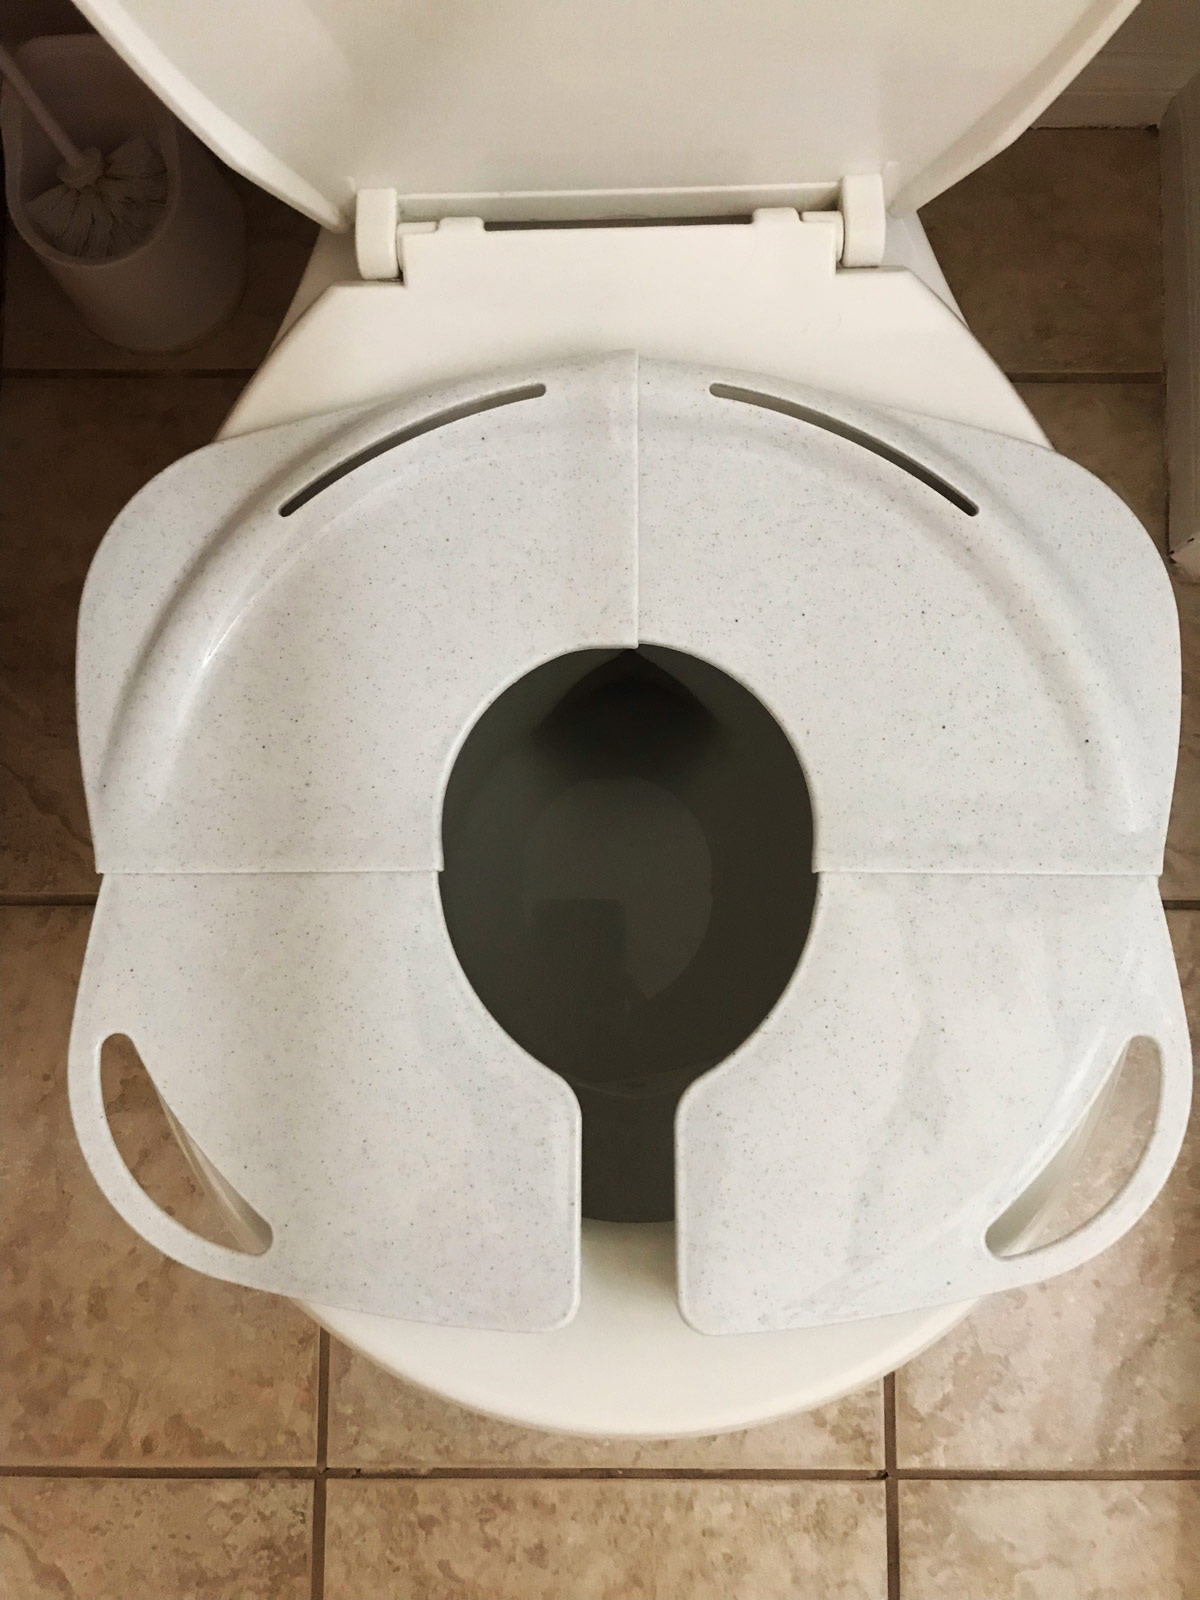 travel potty training toilet seat fitted onto home toilet.